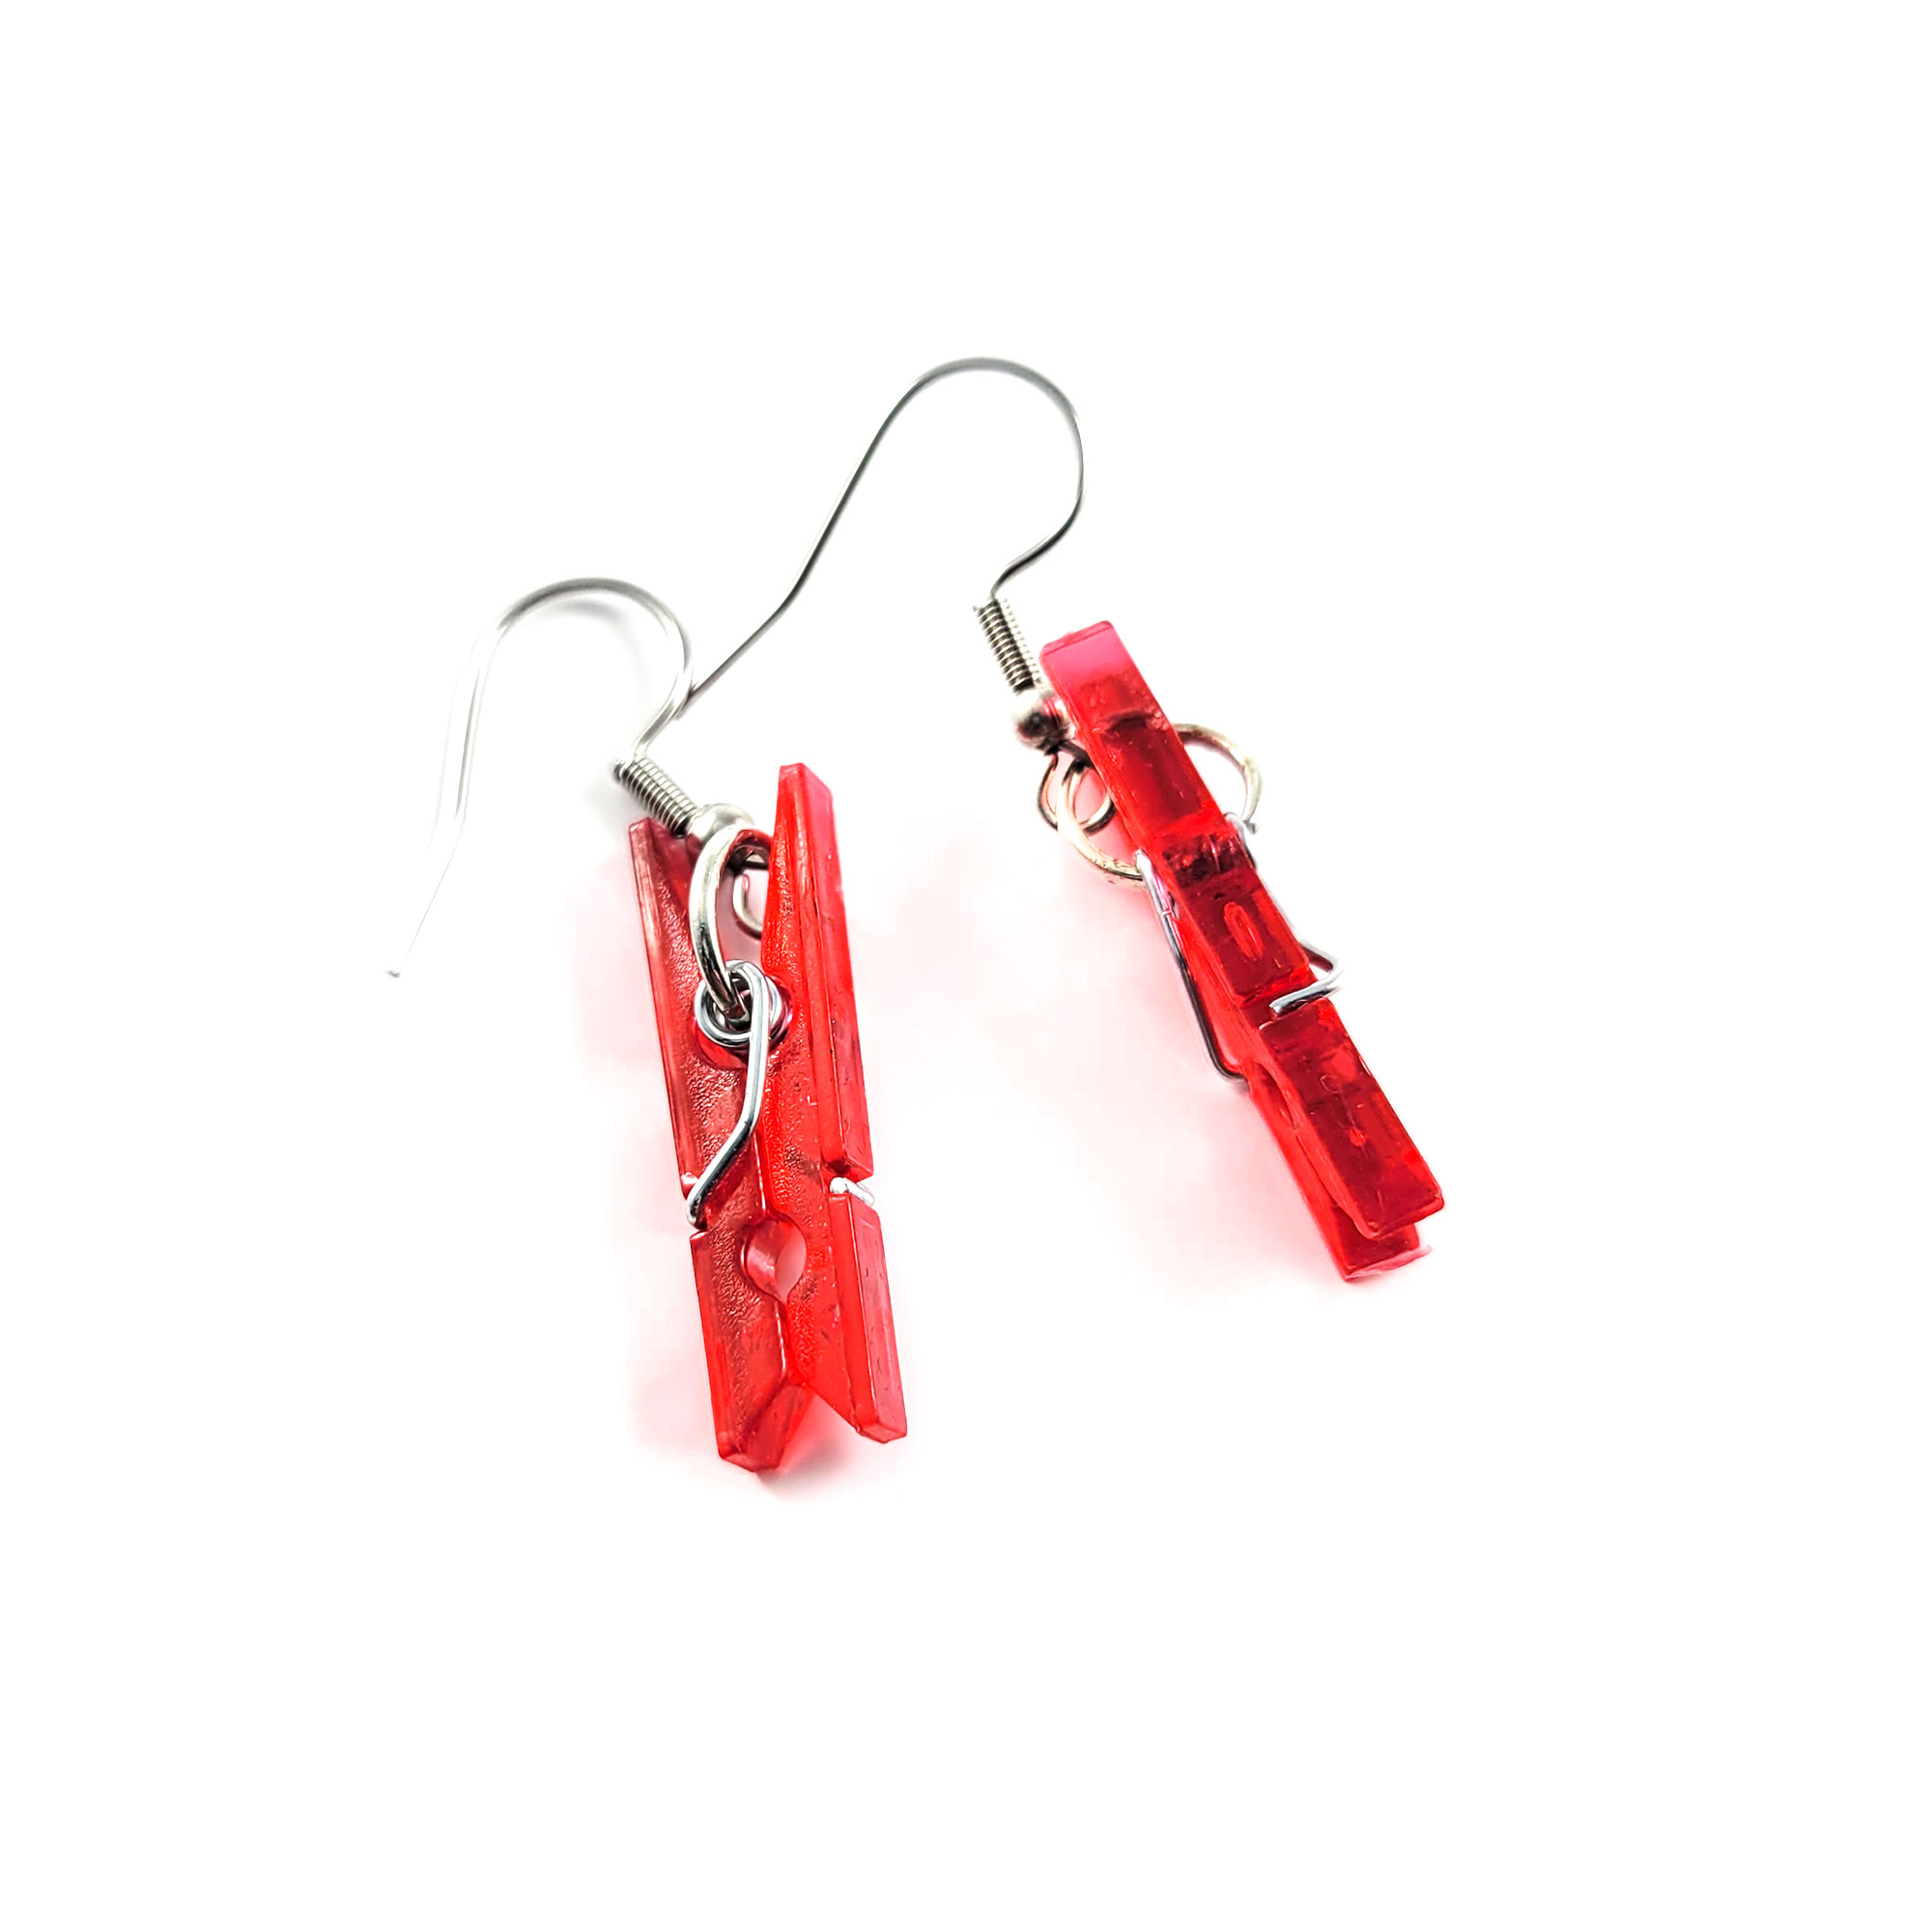 Pain & Pleasure Clothes Pin Earrings by Wilde Designs